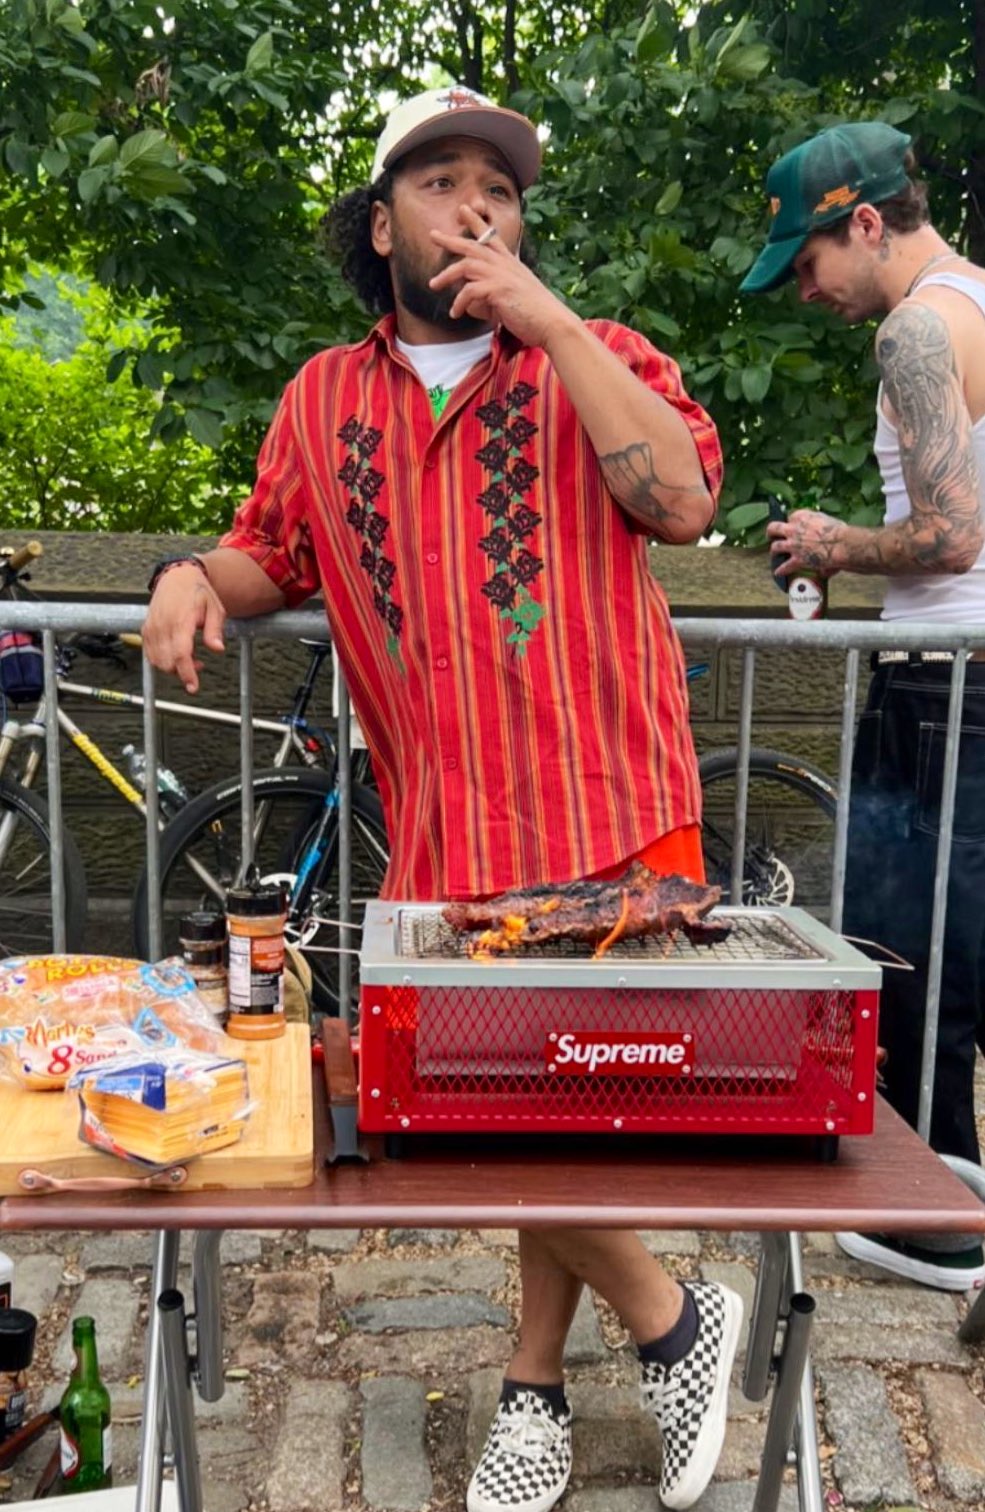 Supreme / Coleman Charcoal Grill \